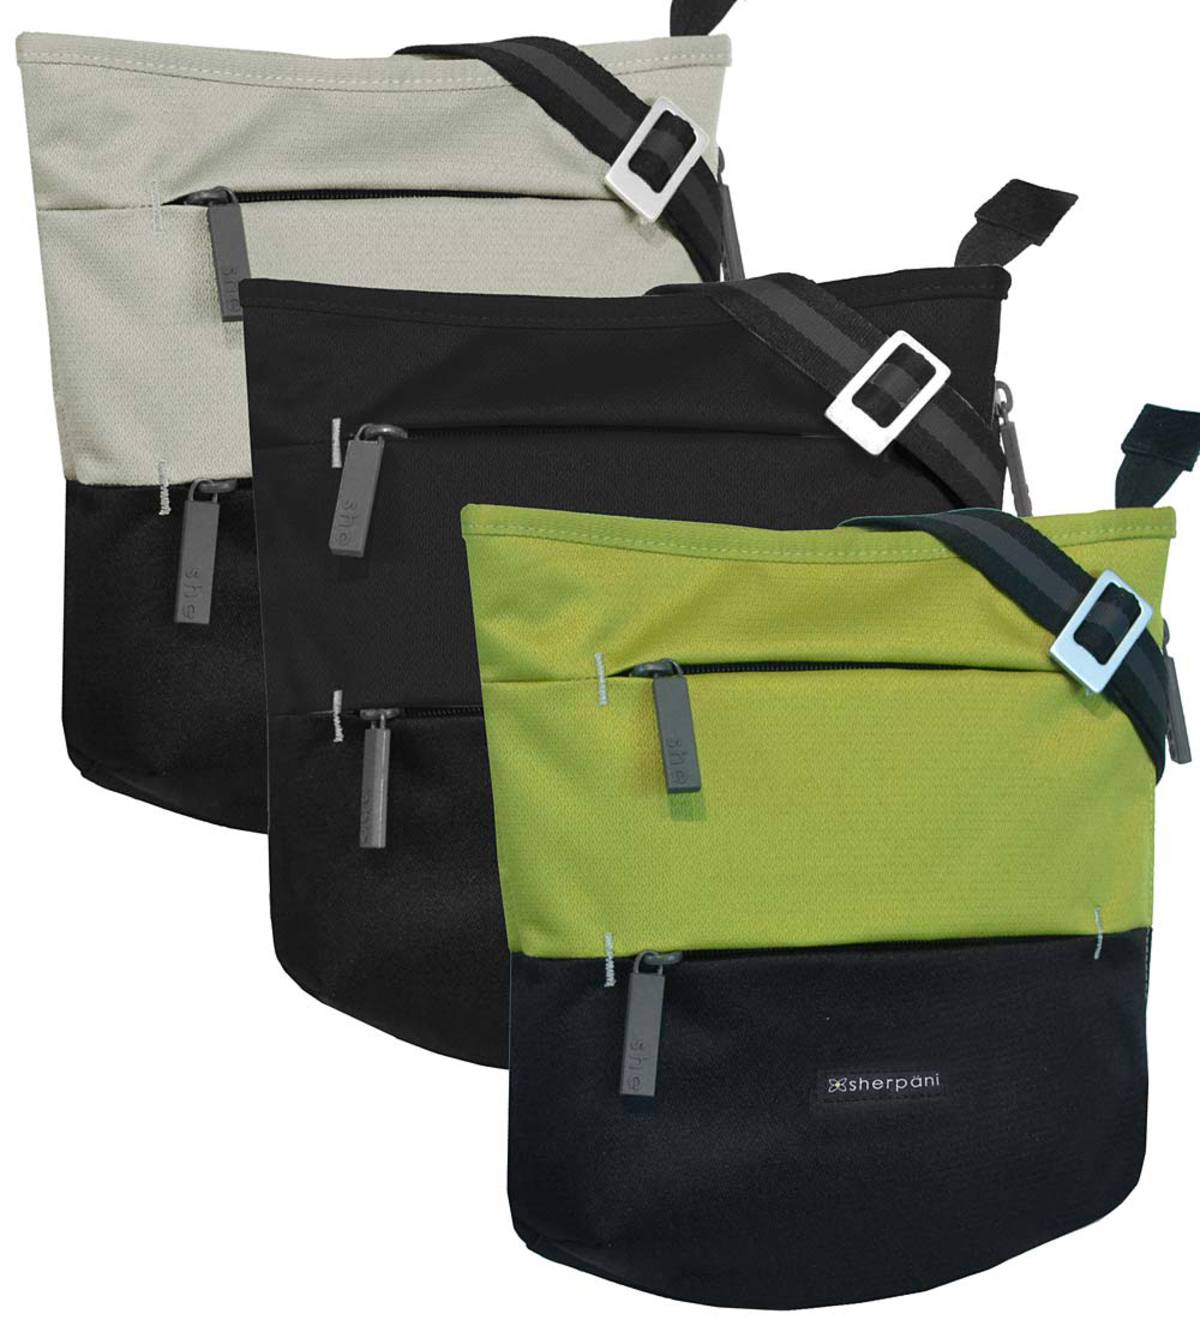 Product Spotlight: Four Sherpani Anti-Theft Bags for Travel